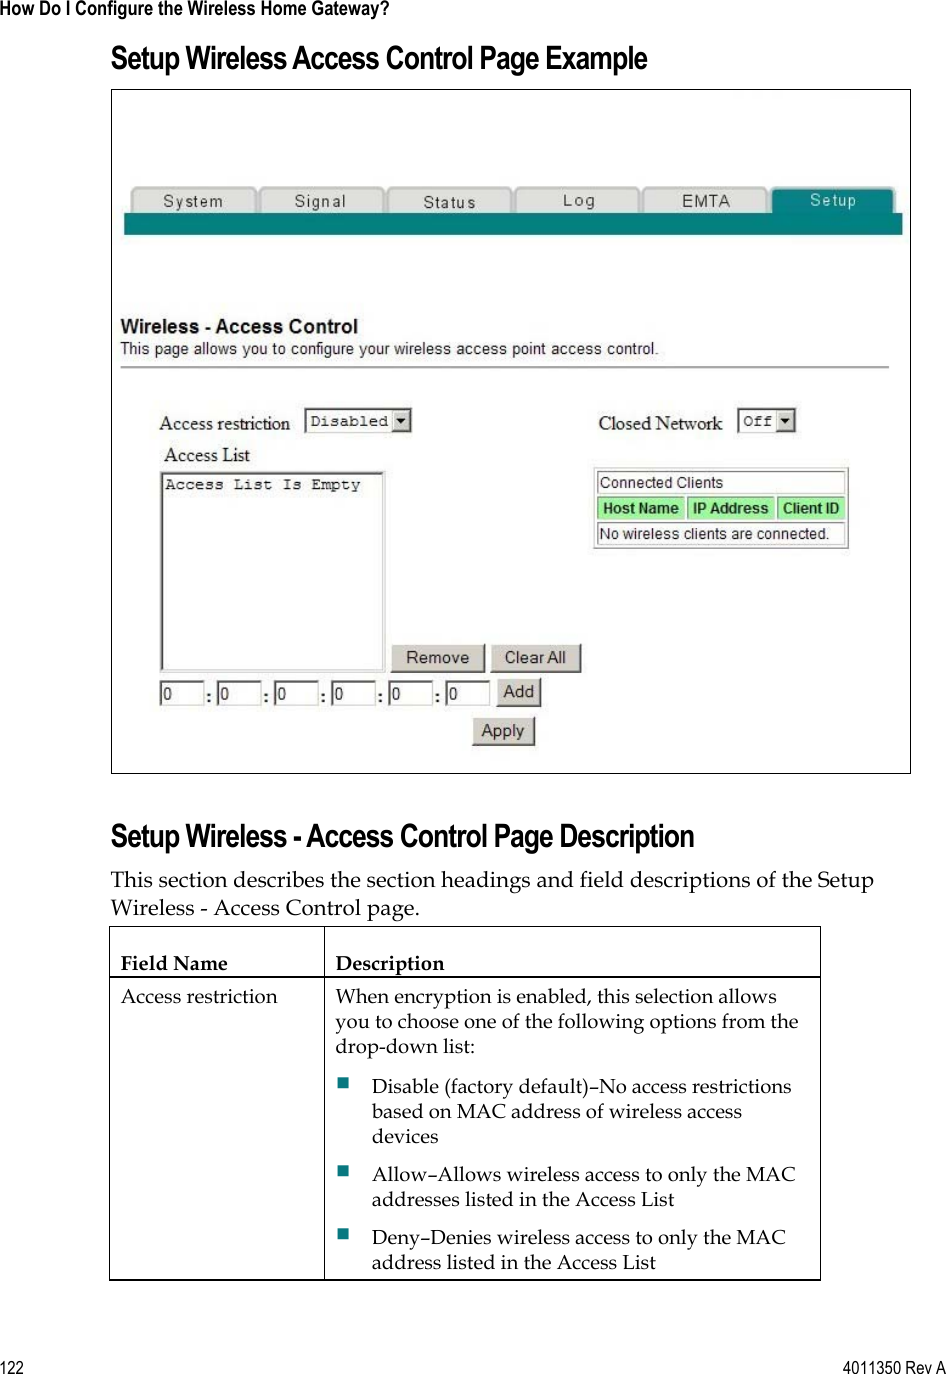 122    4011350 Rev A How Do I Configure the Wireless Home Gateway? Setup Wireless Access Control Page Example Setup Wireless - Access Control Page Description This section describes the section headings and field descriptions of the Setup Wireless - Access Control page. Field Name  Description Access restriction  When encryption is enabled, this selection allows you to choose one of the following options from the drop-down list: Disable (factory default)–No access restrictions based on MAC address of wireless access devicesAllow–Allows wireless access to only the MAC addresses listed in the Access List Deny–Denies wireless access to only the MAC address listed in the Access List 